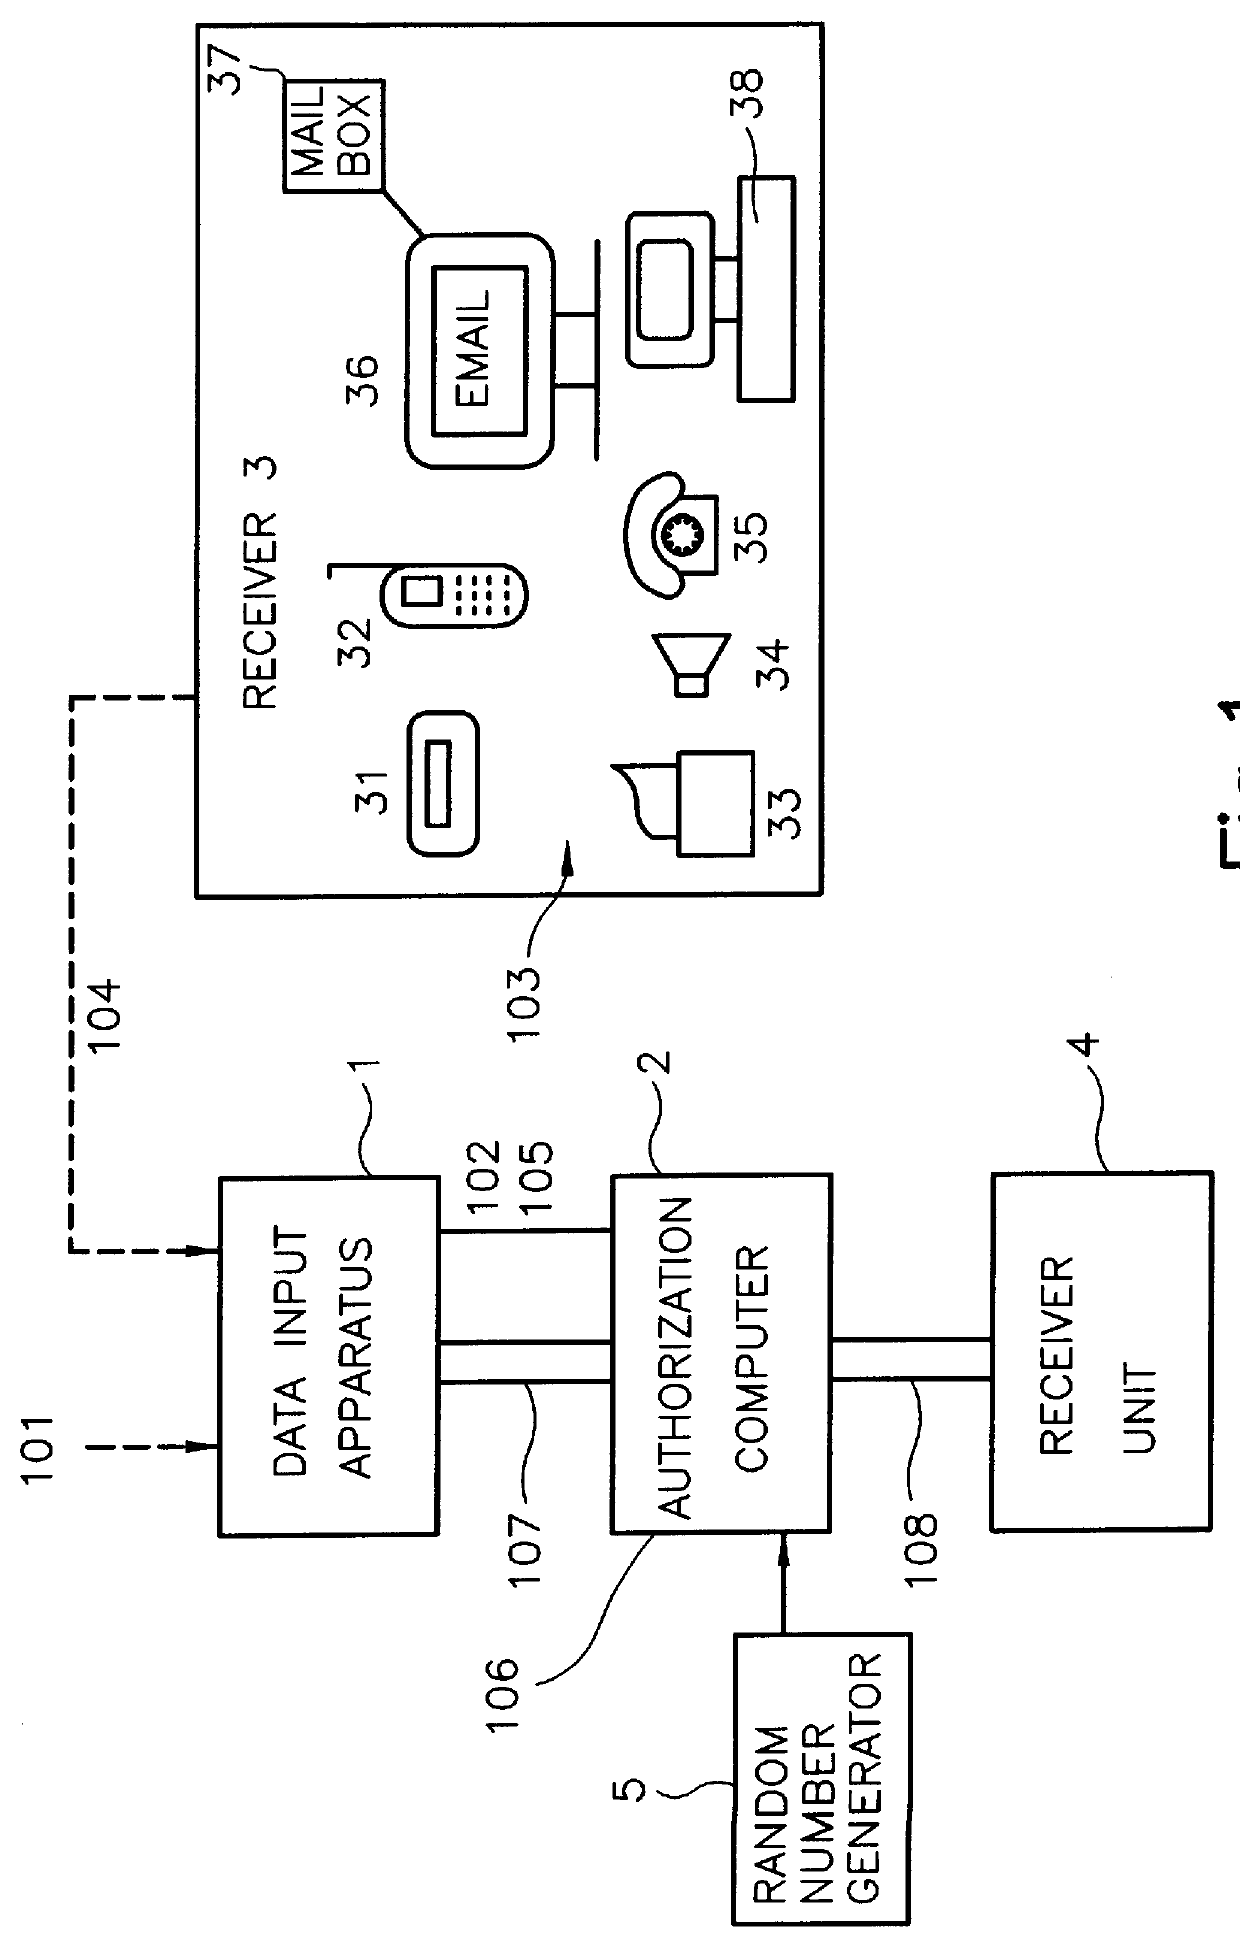 Method for authorizing in data transmission systems